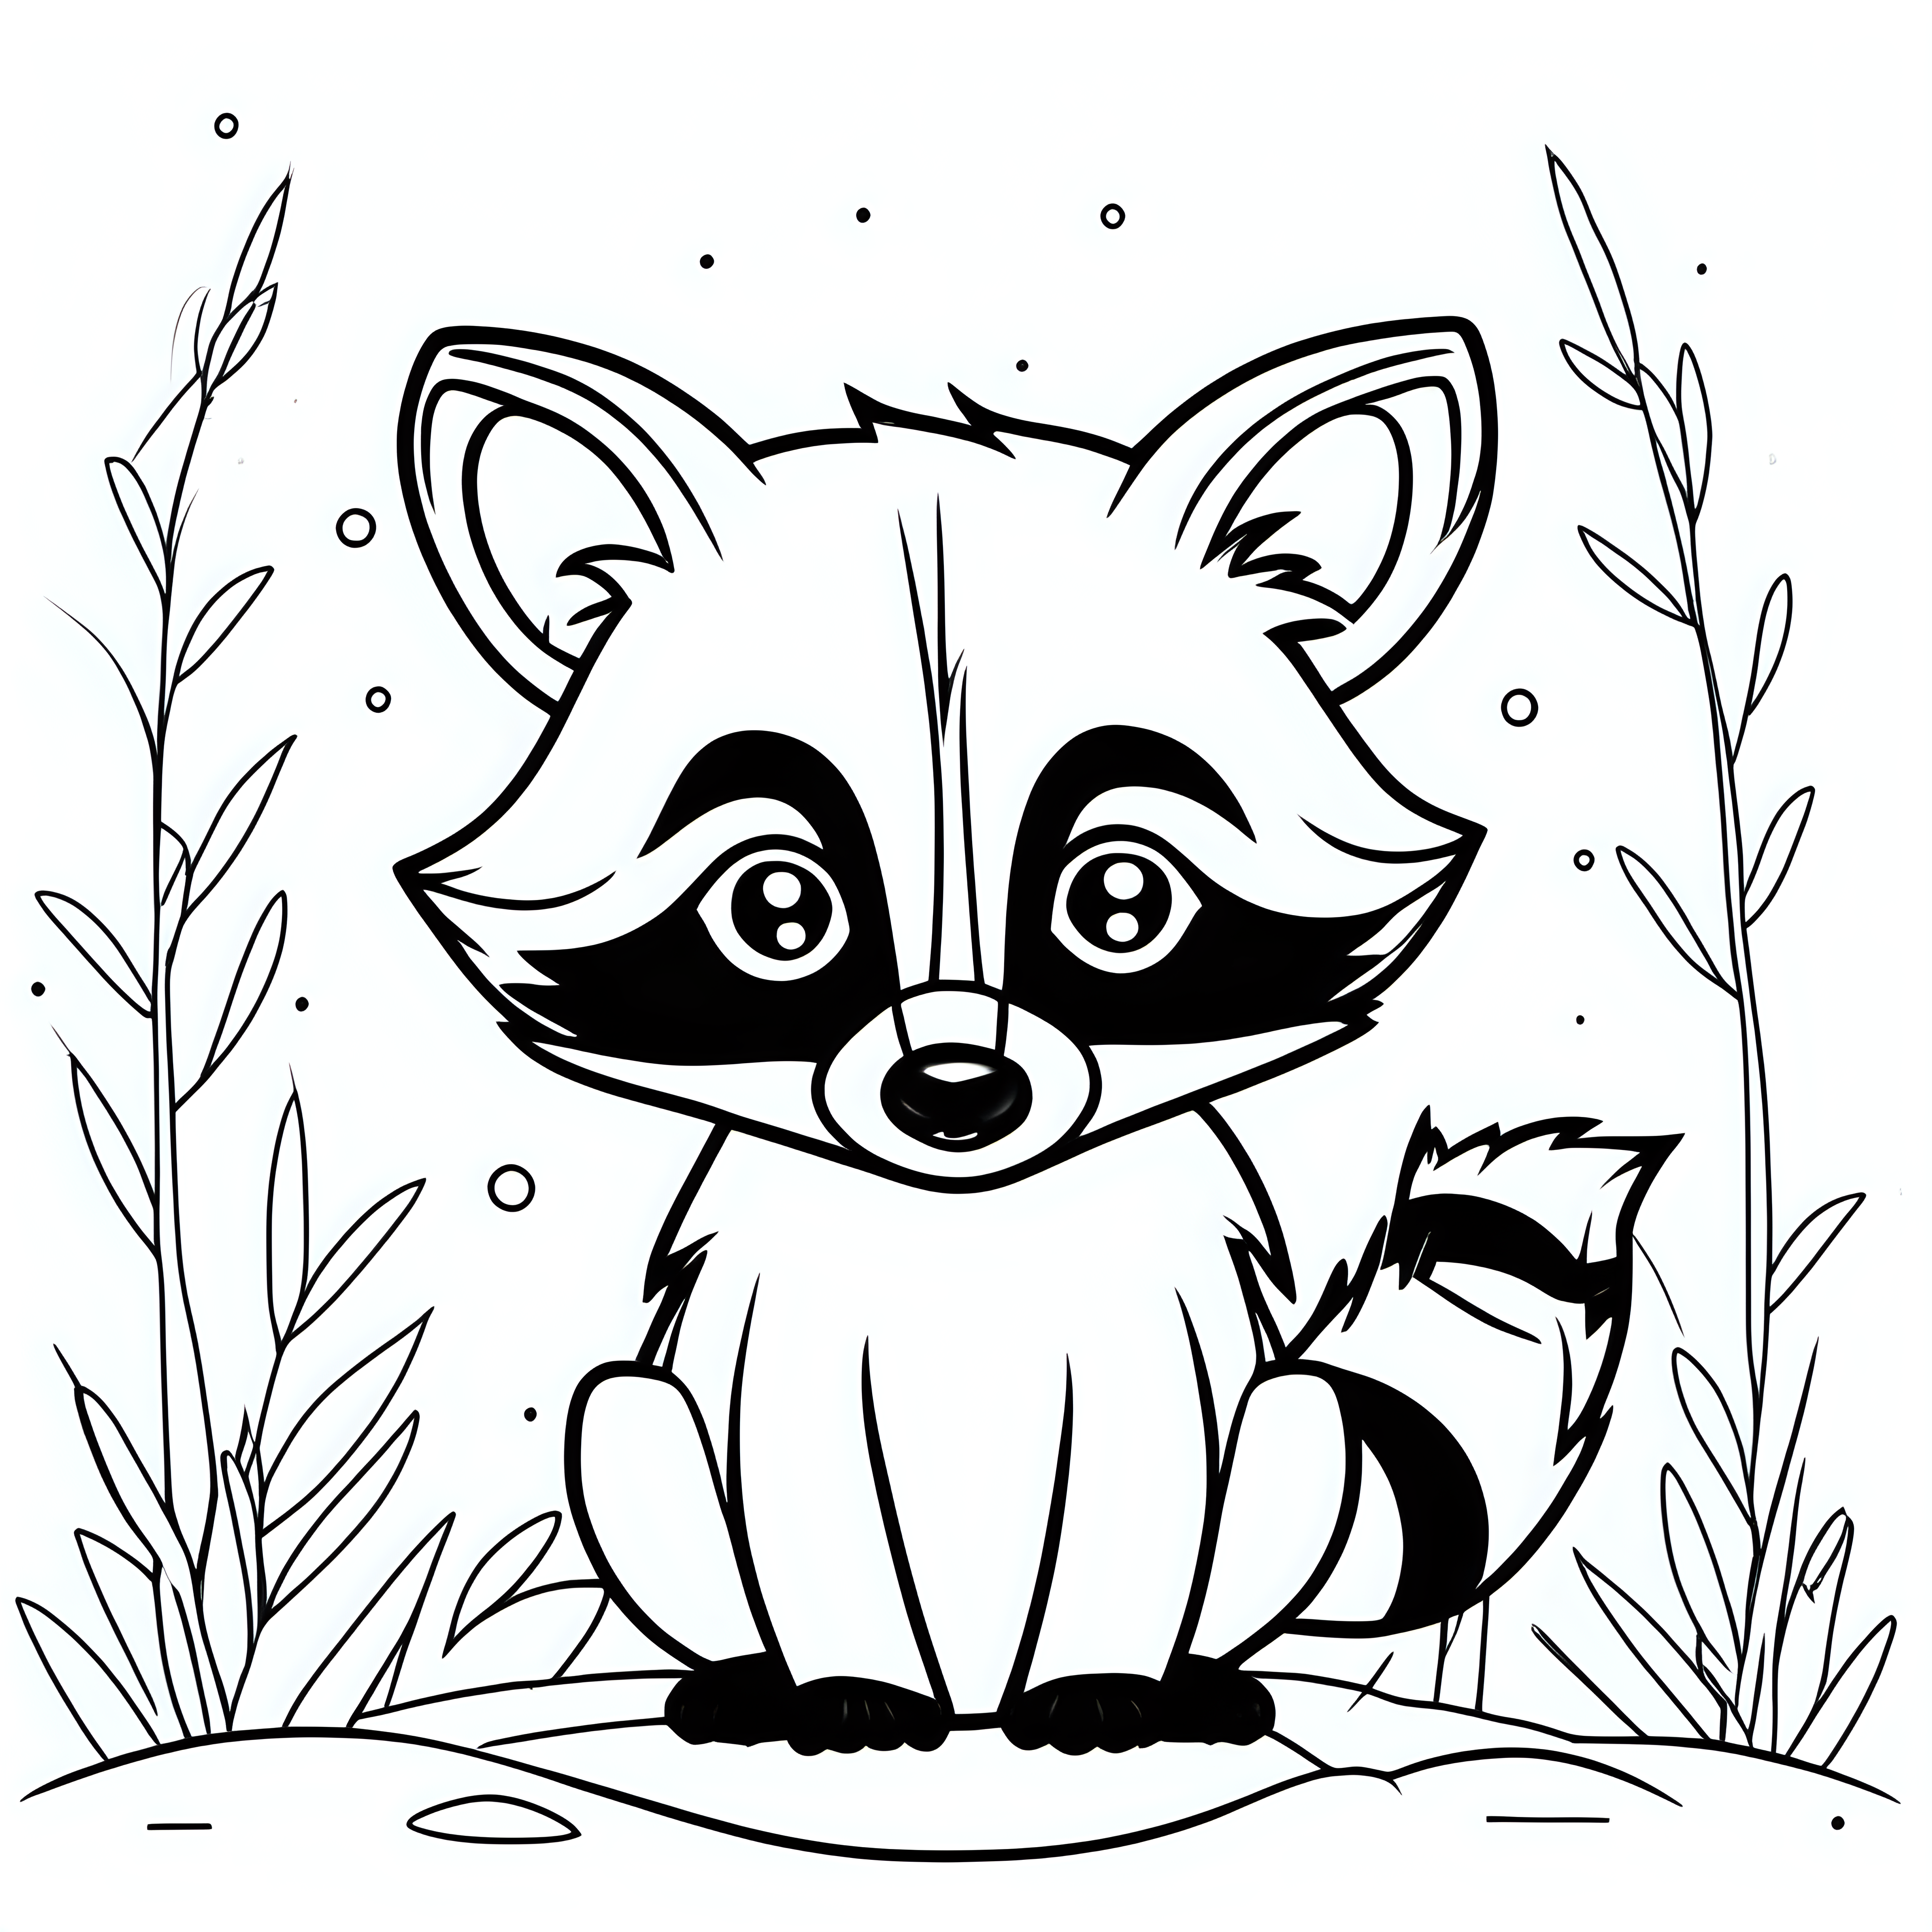 draw a cute Raccoon with only the outline